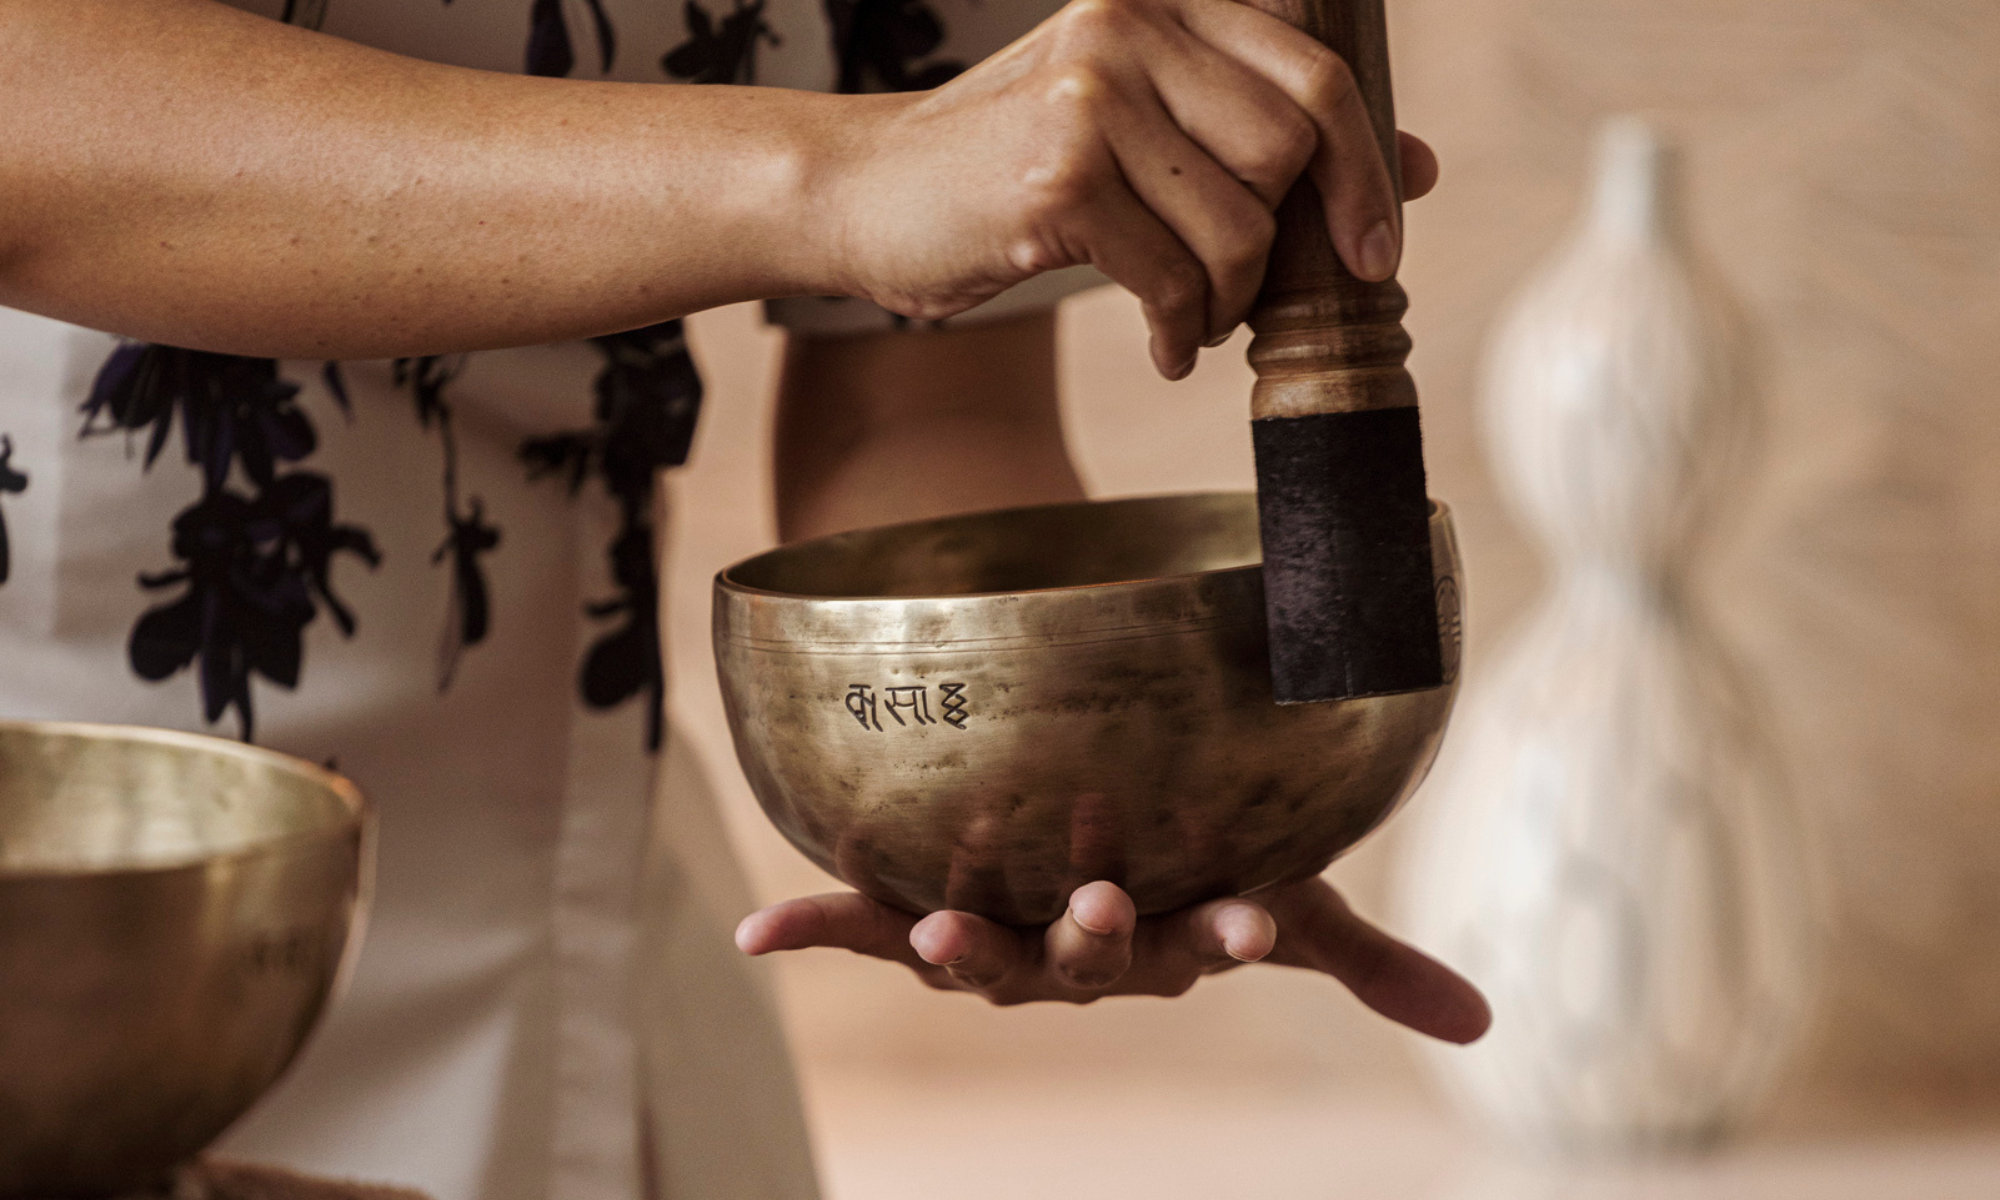 Singing Bowl Session: A Sound Bath Healing Experience